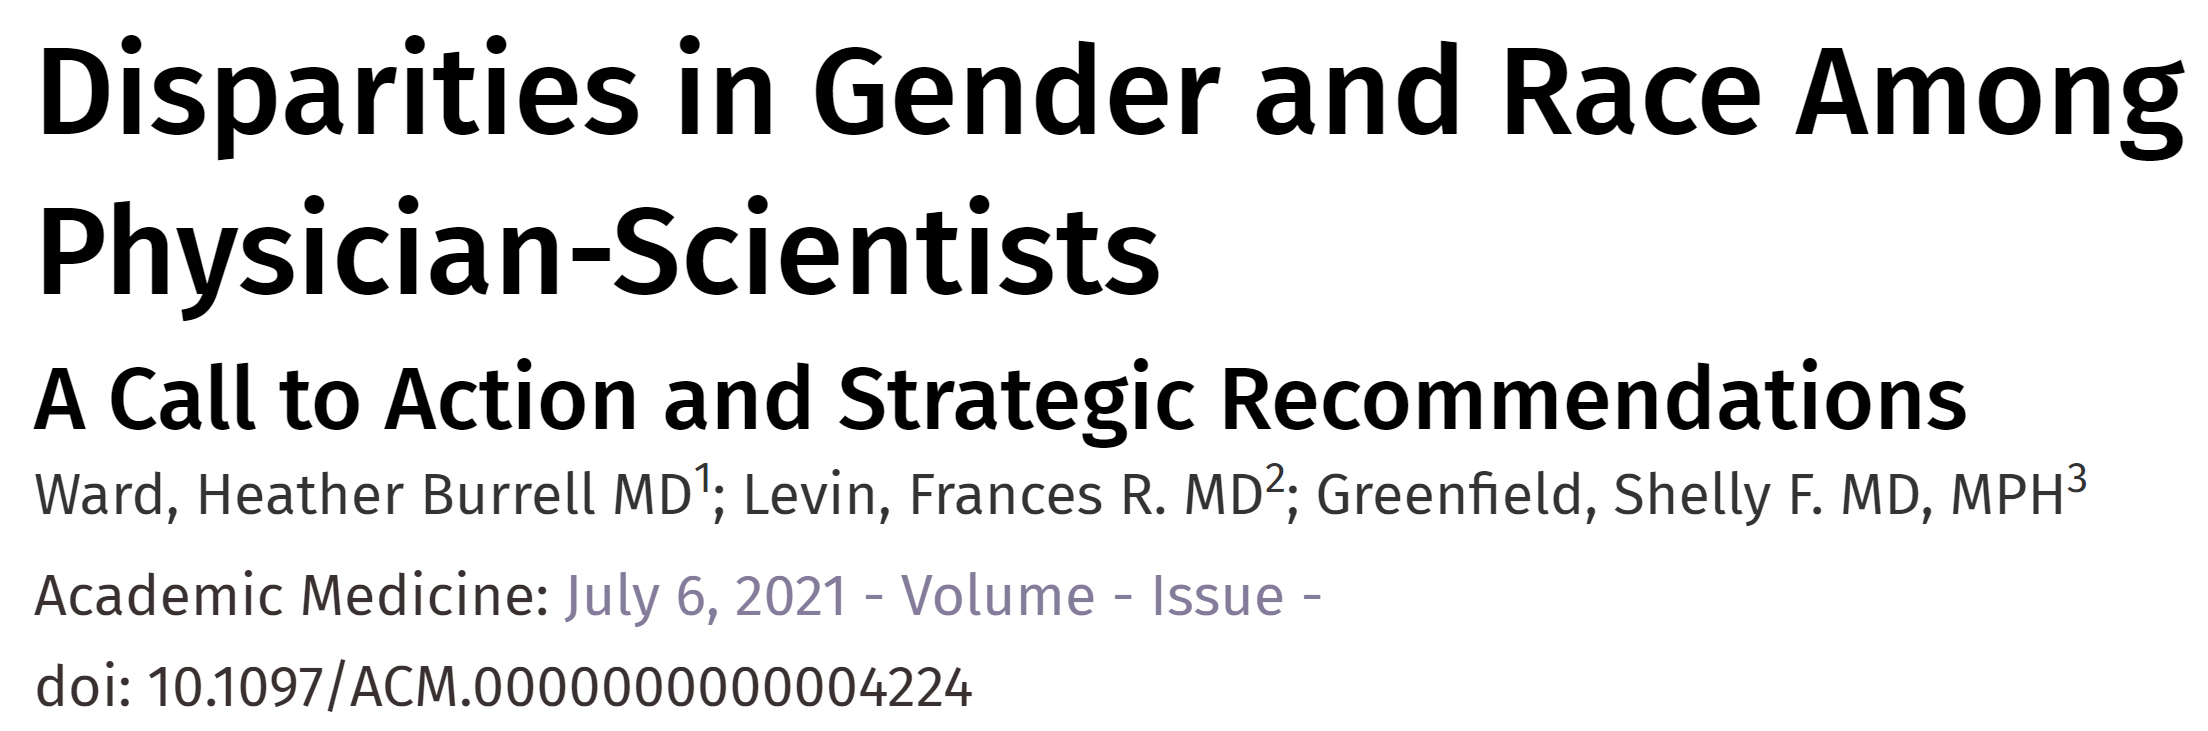 Linked Image to Academic Medicine article - Disparities in Gender and Race Among Physician-Scientists by Heather Burrell Ward, MD et al